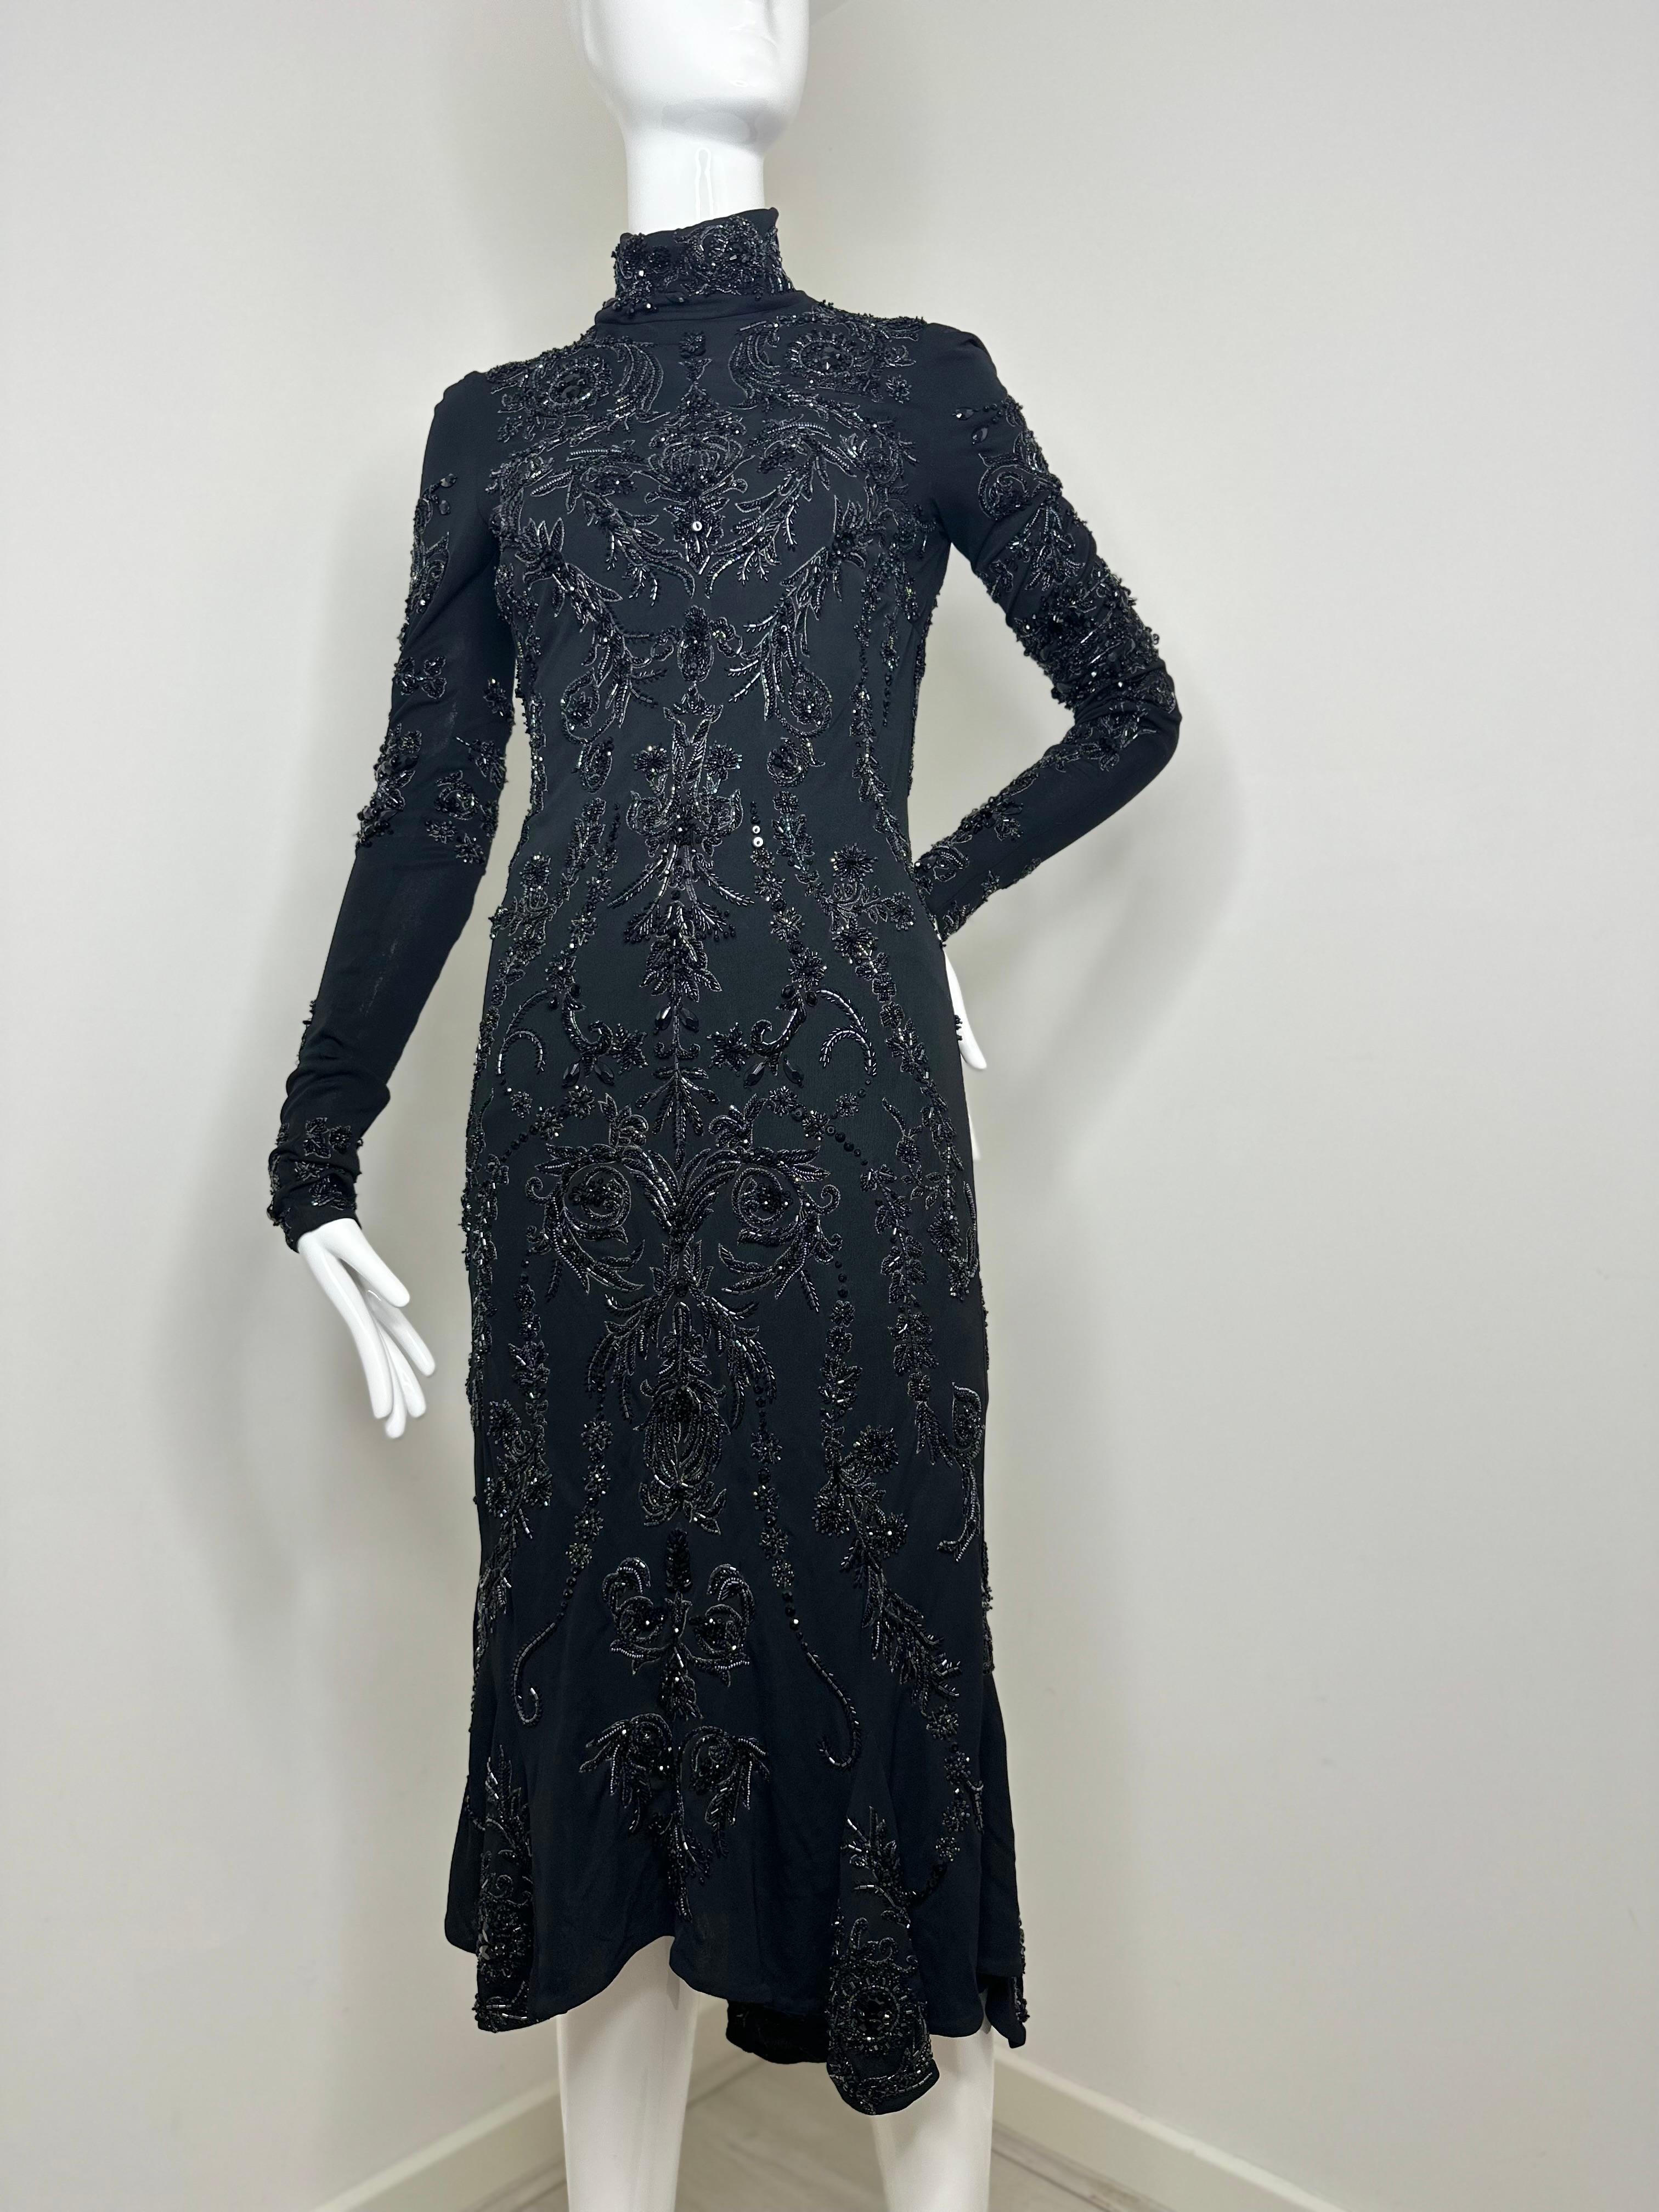 Roberto Cavalli 2003 black open back midi dress 

Fully covered in exquisite hand sewn beads 
Size 40 would fit XS best 
New with tags, original price $29,000

Side zipper in the neck area 
Approx. flat measurements:
Length: 46 inches 
Waist: 12.5